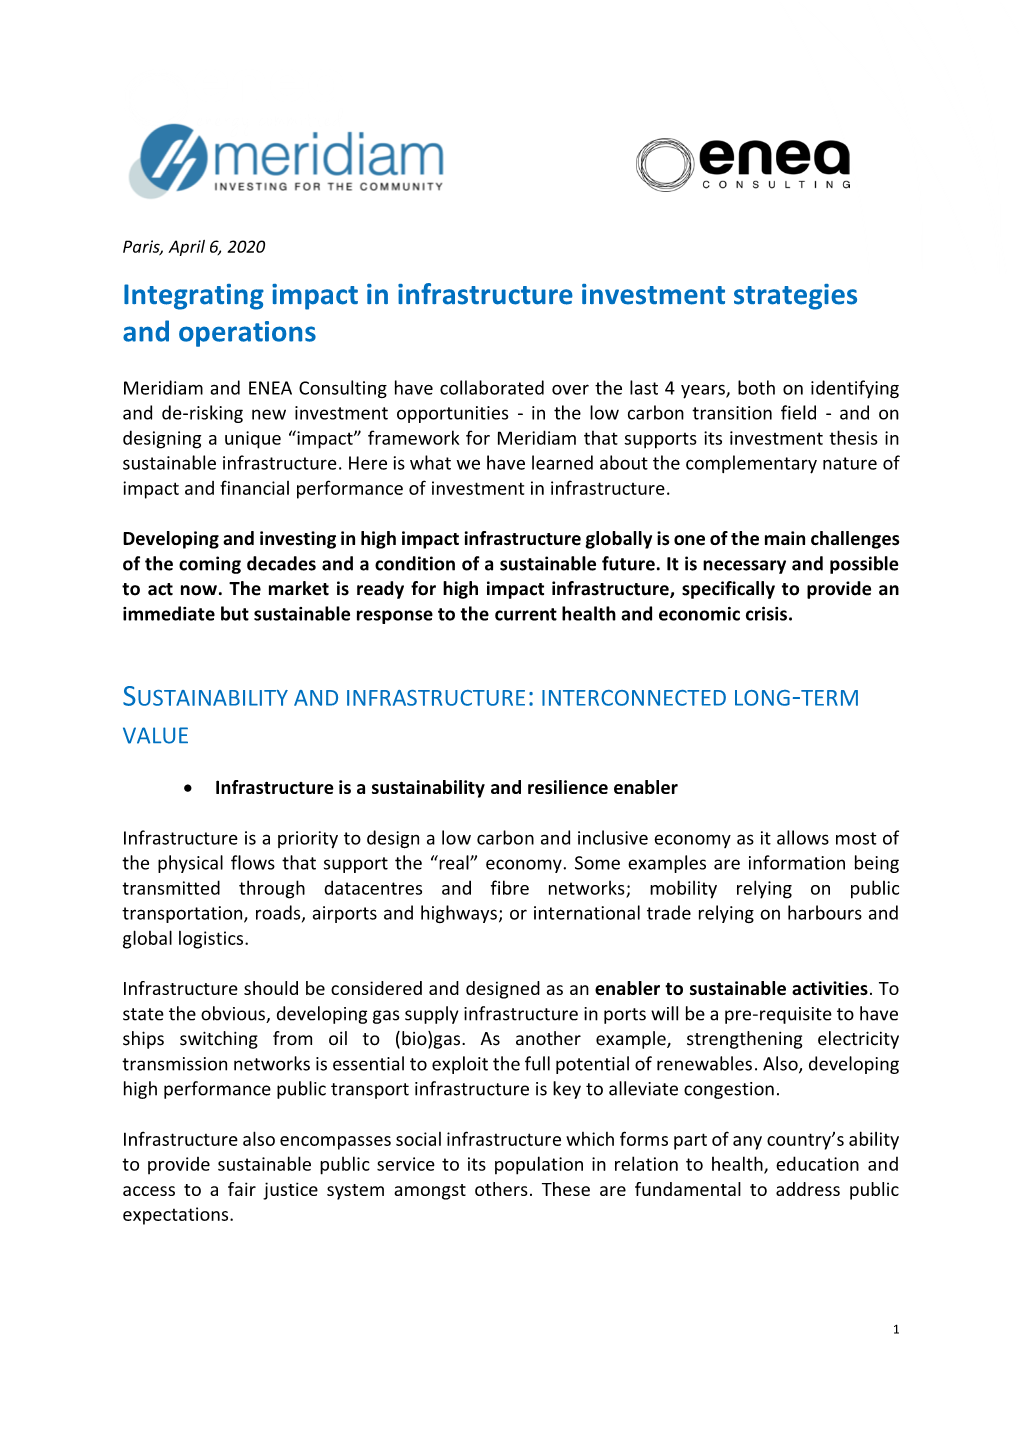 Meridiam – Integrating Impact in Infrastructure Investment Strategies and Operations